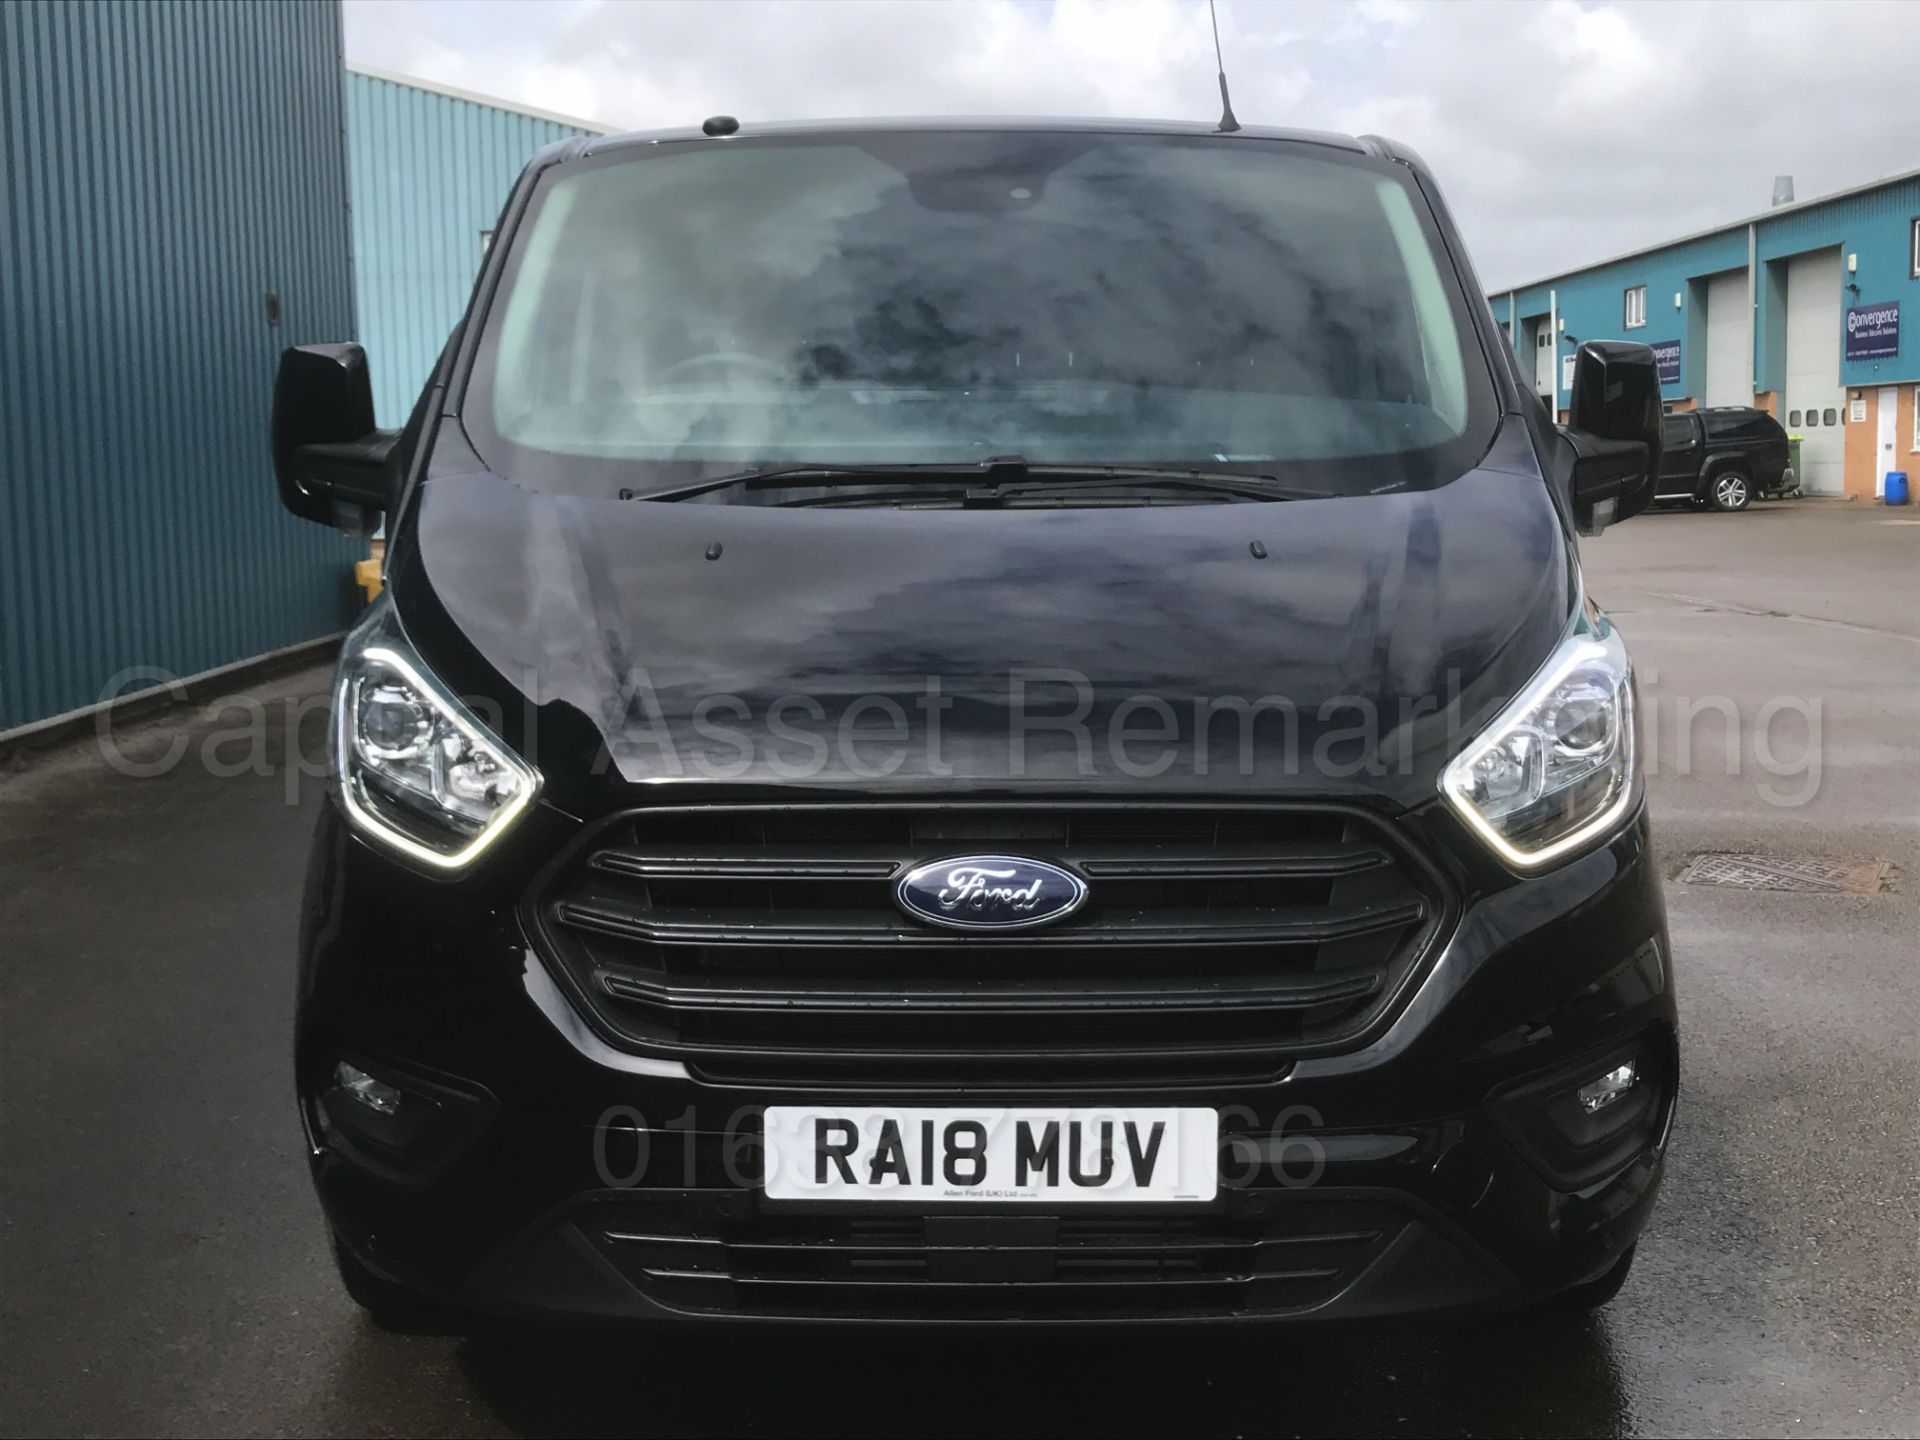 FORD TRANSIT CUSTOM *TREND EDITION* (2018 - ALL NEW MODEL) '2.0 TDCI - 6 SPEED' *DELIVERY MILEAGE* - Bild 3 aus 49